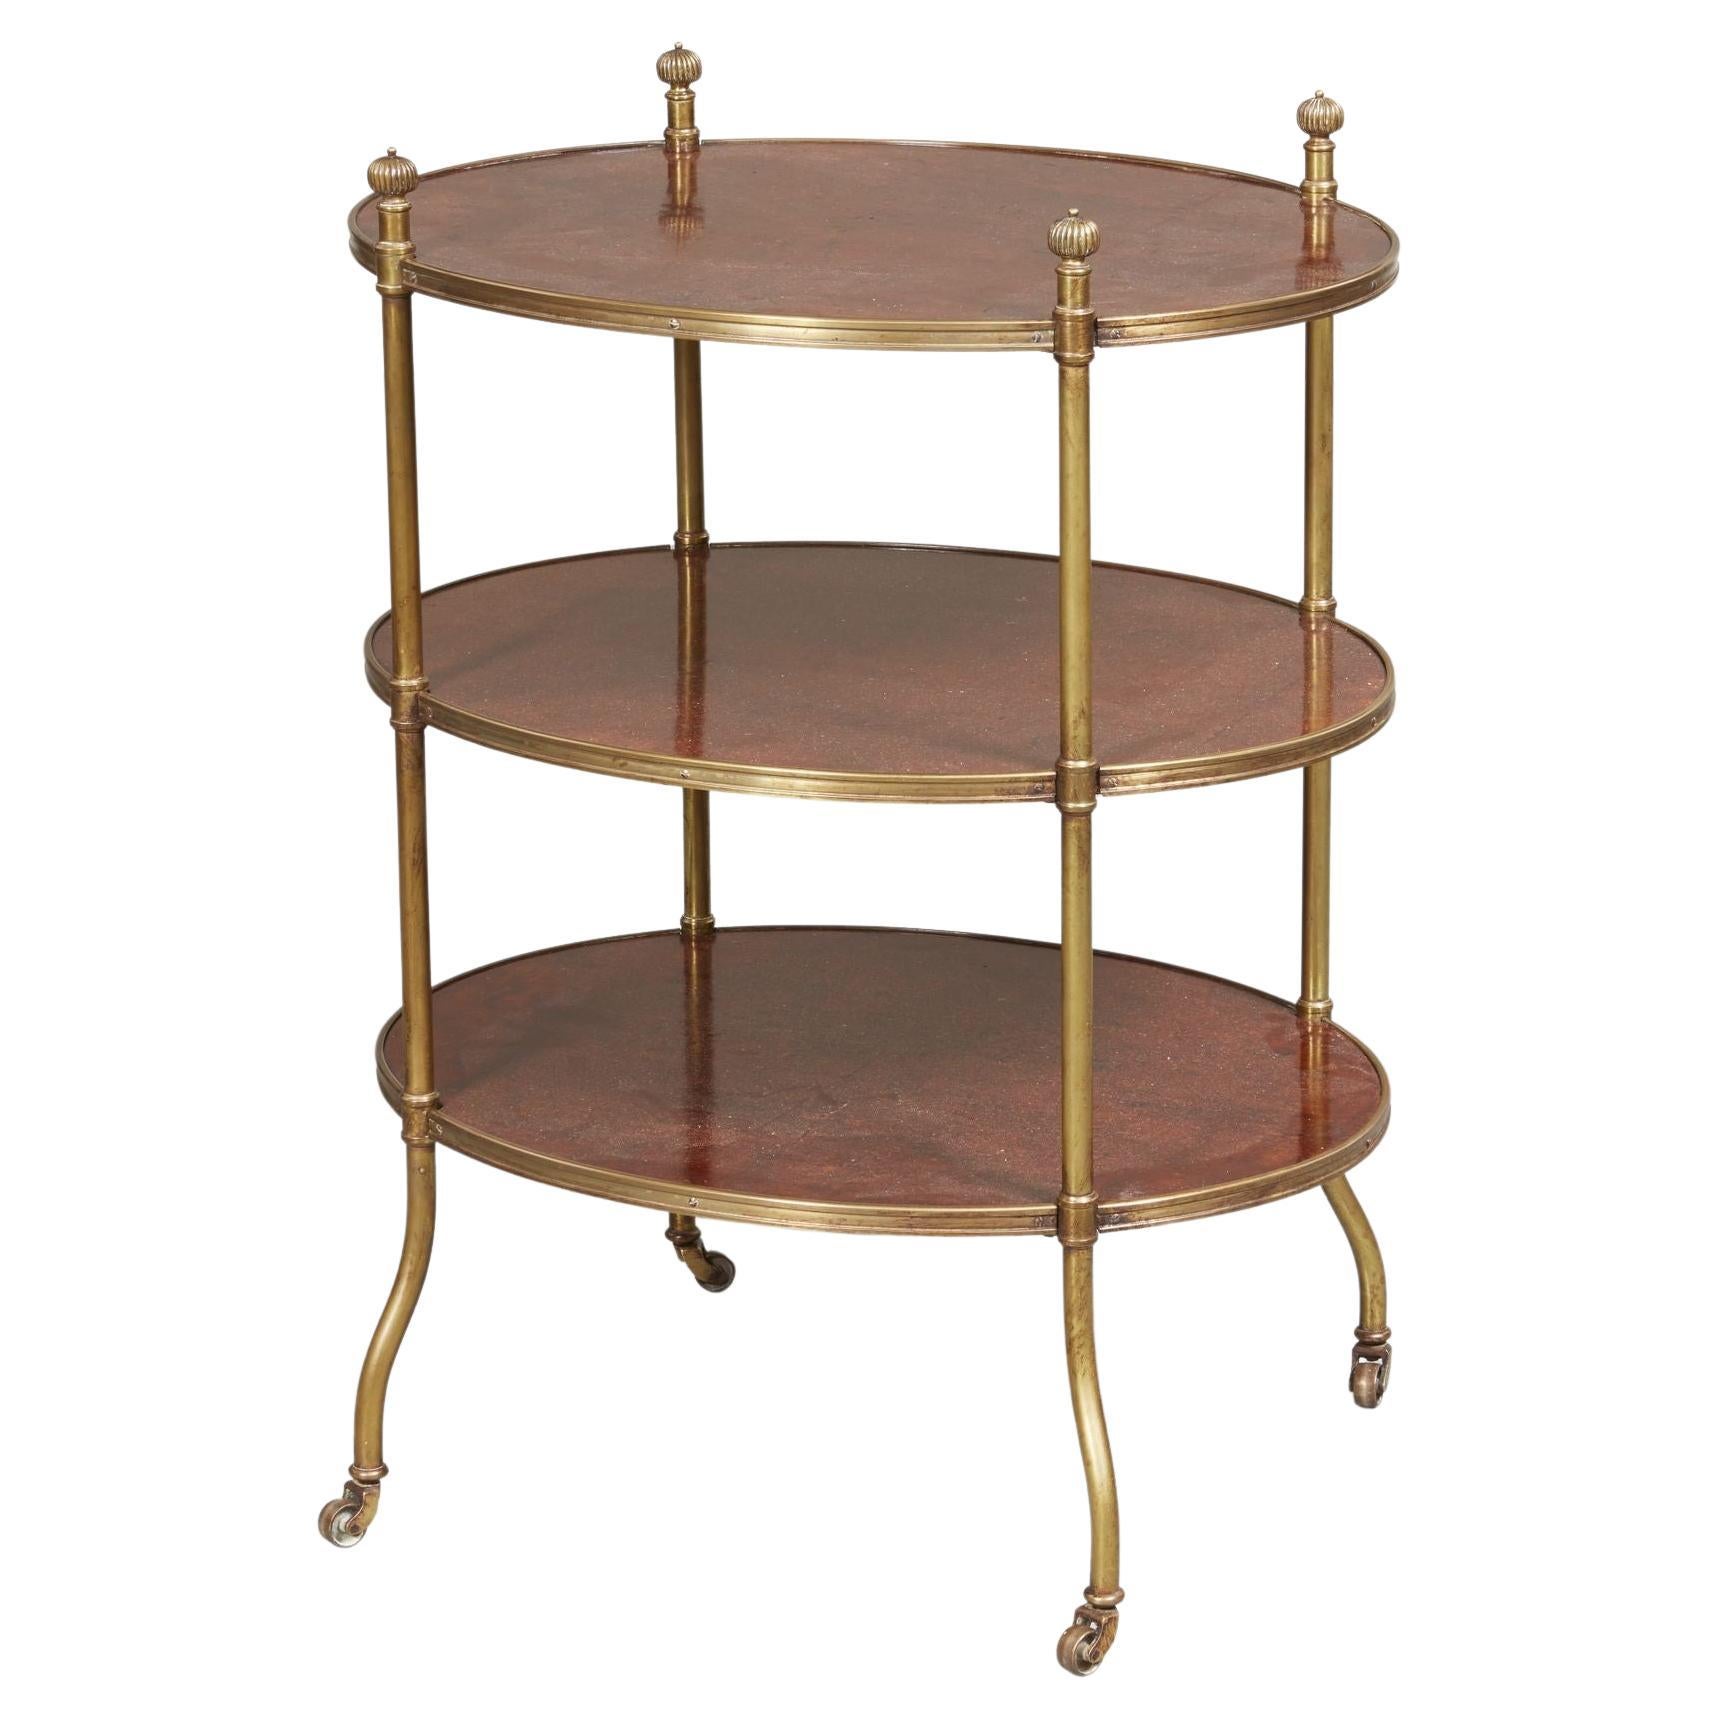 Early 19th C. English Campaign Plum Pudding Tiered Table